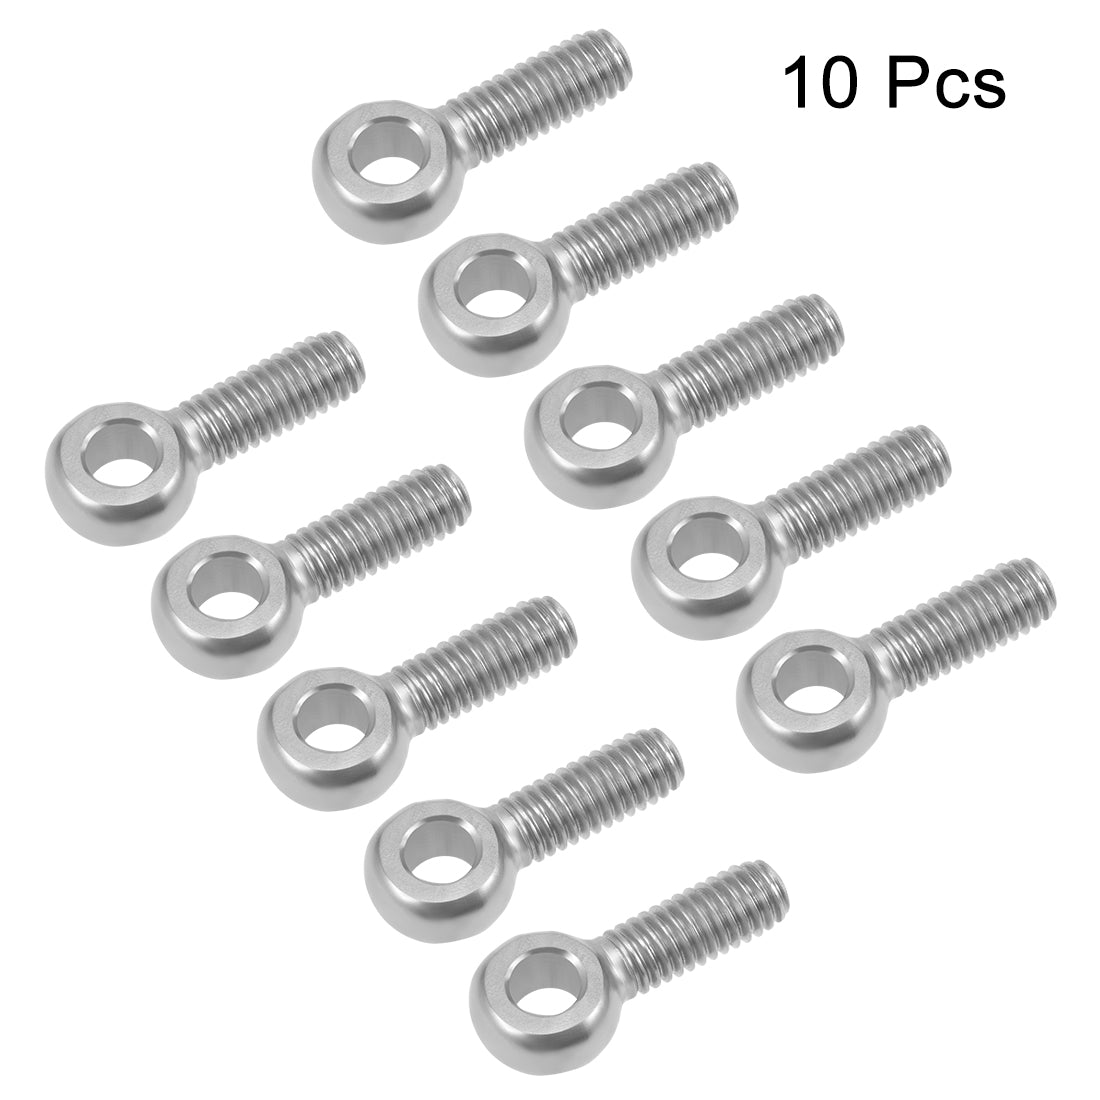 uxcell Uxcell M6 x 20mm Machinery Shoulder Swing Lifting Eye Bolt  304 Stainless Steel Metric Thread 10pcs